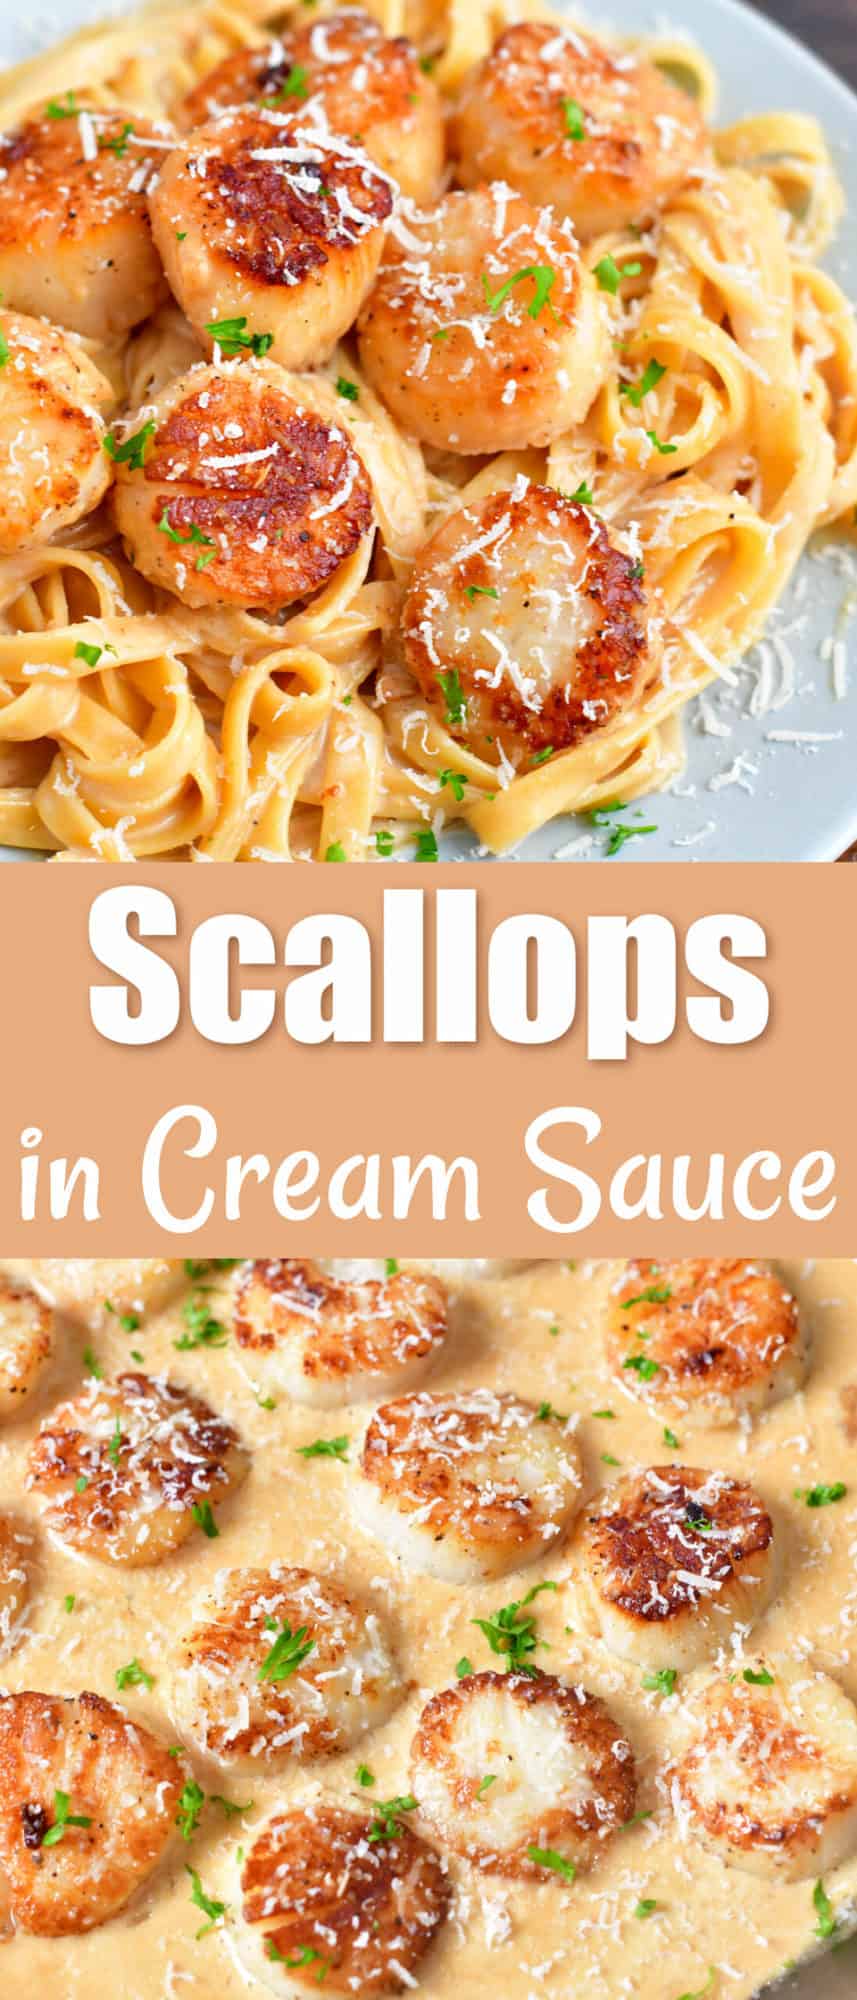 titled photo collage (and shown): Scallops in Cream Sauce